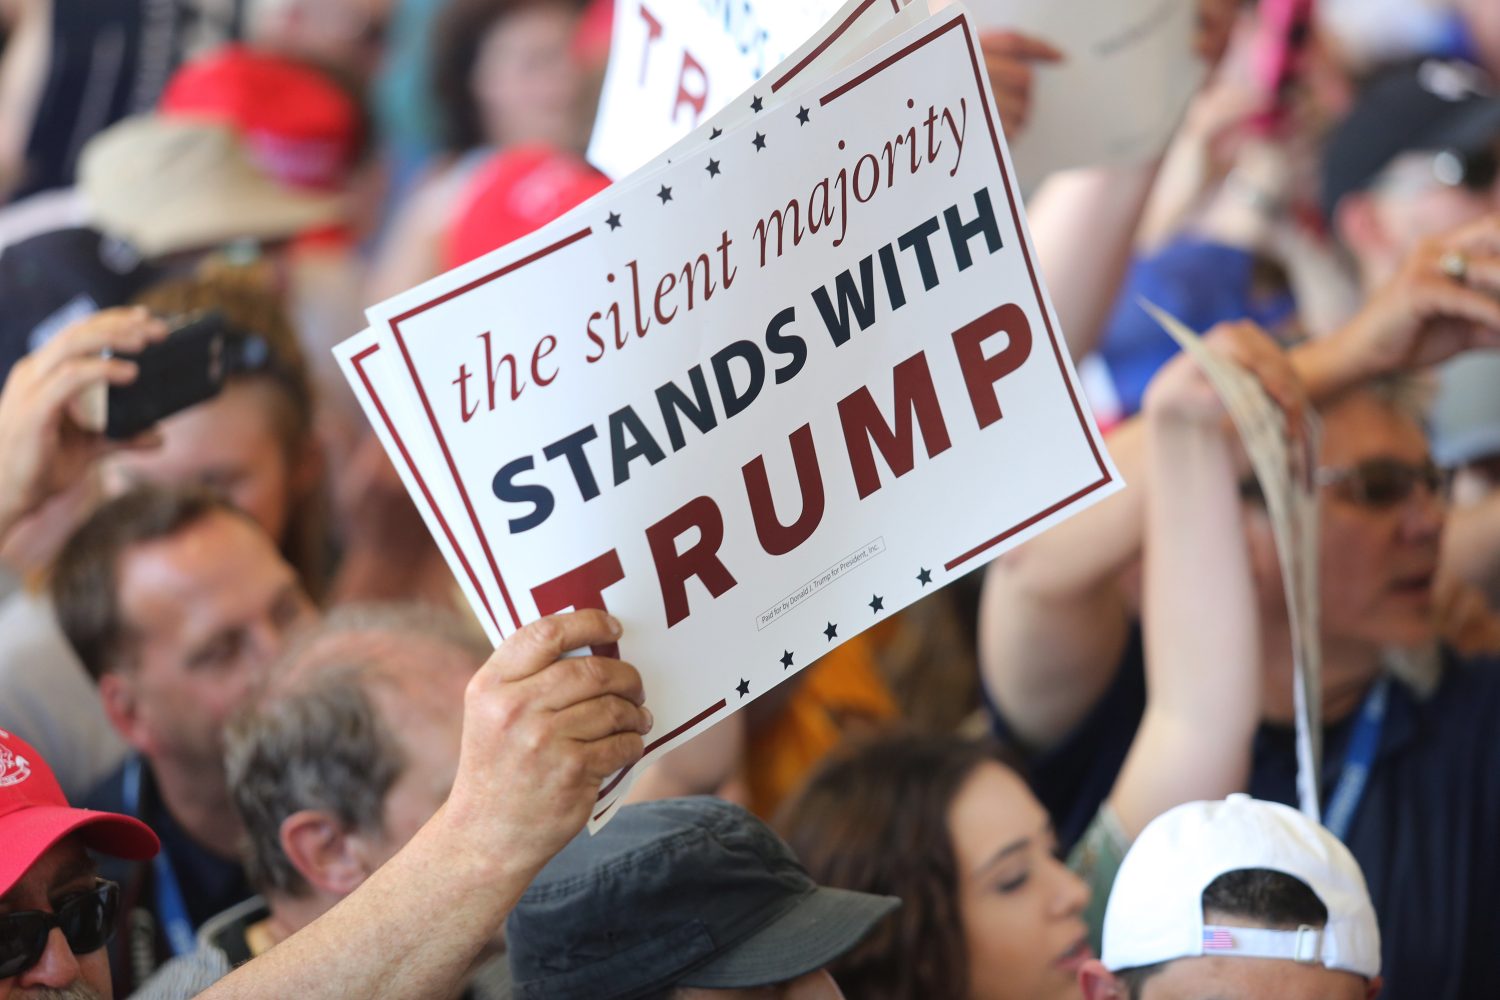 Supporters+hold+signs+at+U.S.+Republican+presidential+candidate+Donald+Trumps+campaign+rally+at+Werner+Enterprises+Hangar+in+Omaha%2C+Nebraska%2C+United+States+May+6%2C+2016.++REUTERS%2FLane+Hickenbottom+-+RTX2D6QU